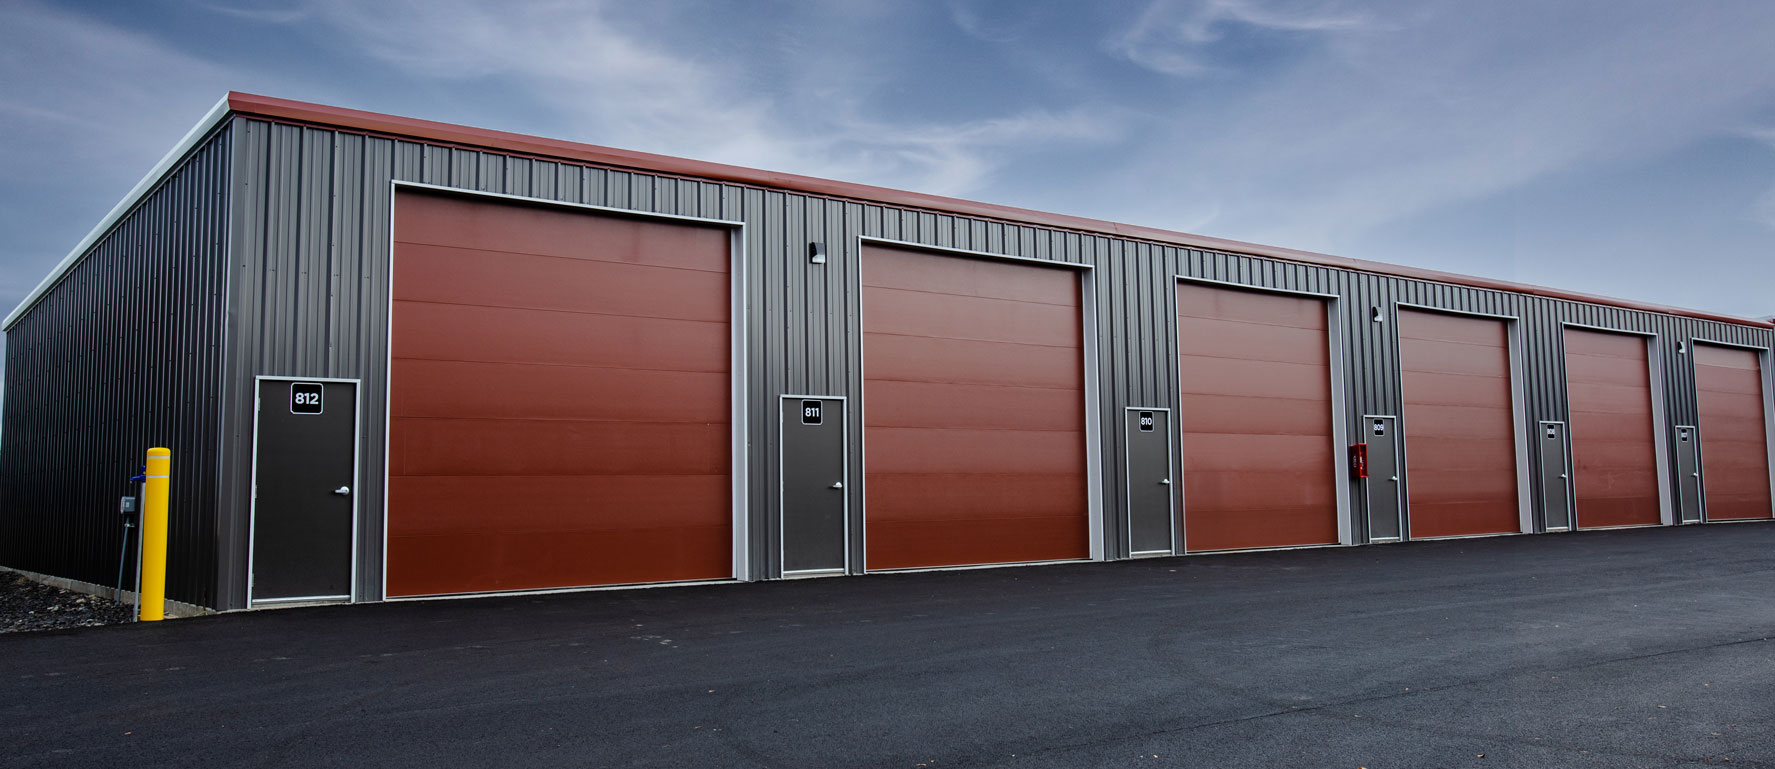 RV storage facility with large red doors